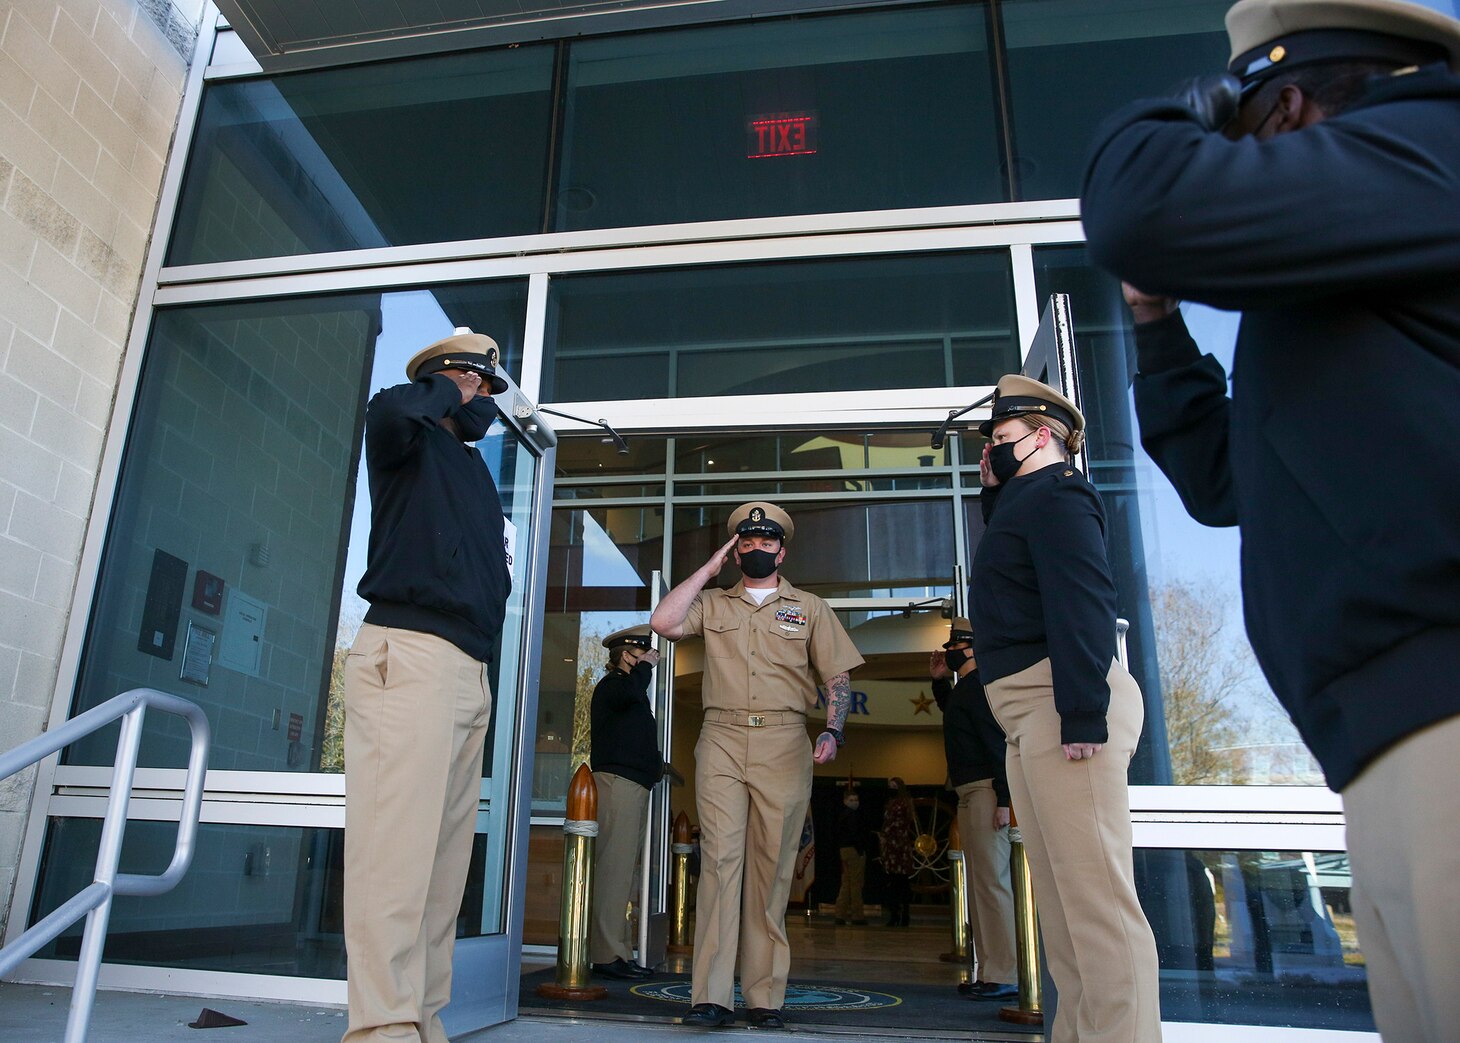 Chief Intelligence Specialist Joshua Waldrop, assigned to U.S. Fleet Forces Command (USFFC), renders a hand salute after his advancement during a chief petty officer (CPO) pinning ceremony at the USFFC headquarters in Norfolk, Virginia.